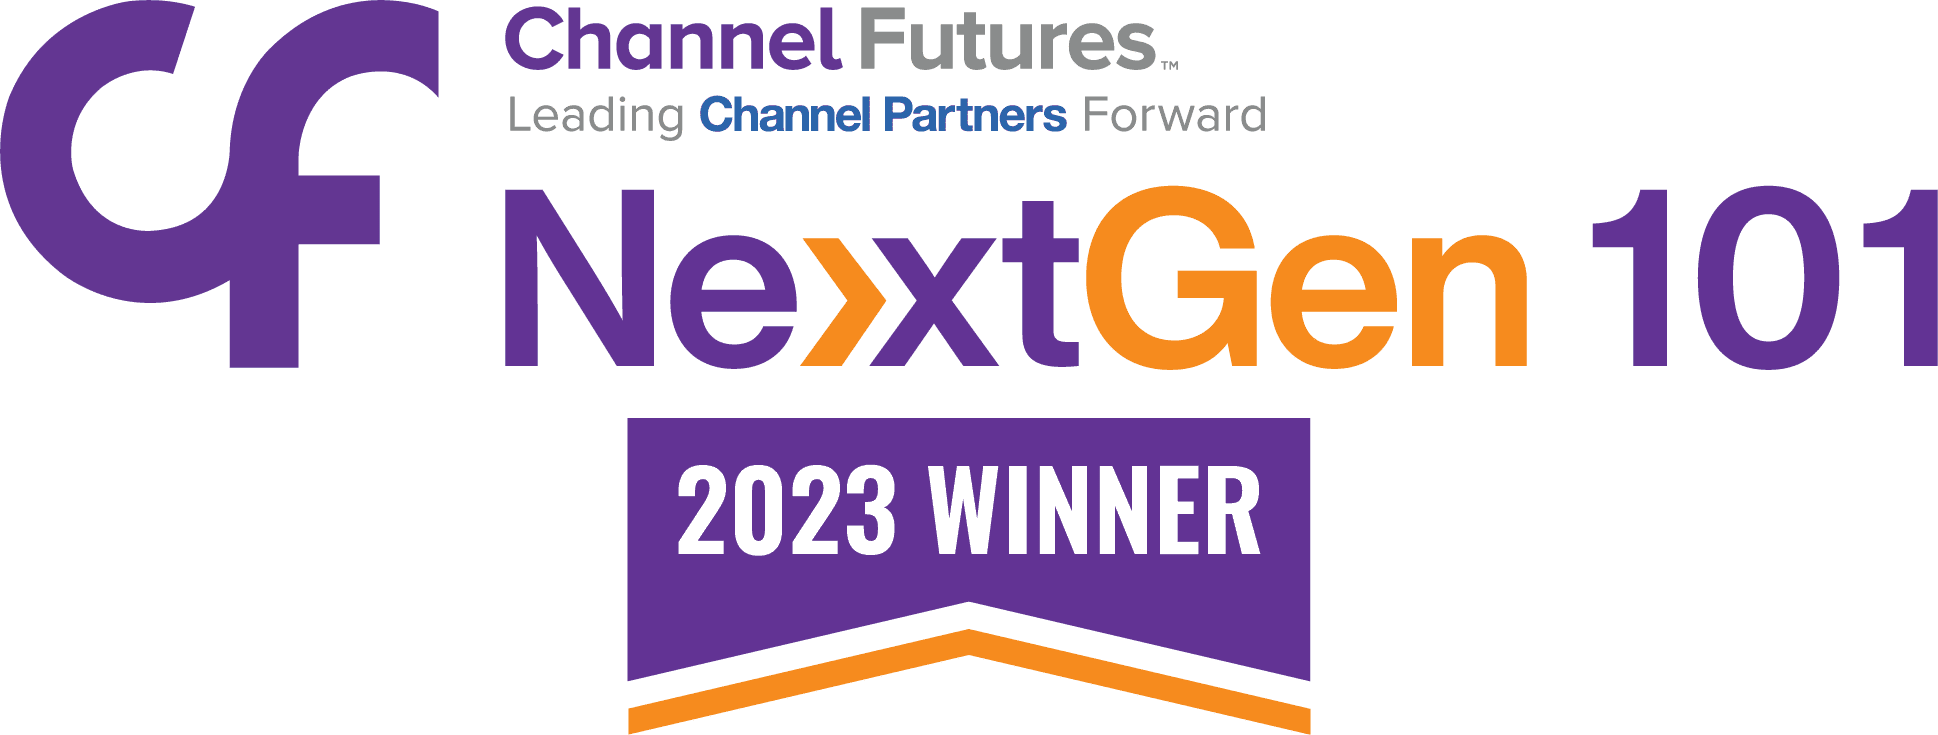 ChannelFutures NextGen winner logo for business that provides managed IT services near me.